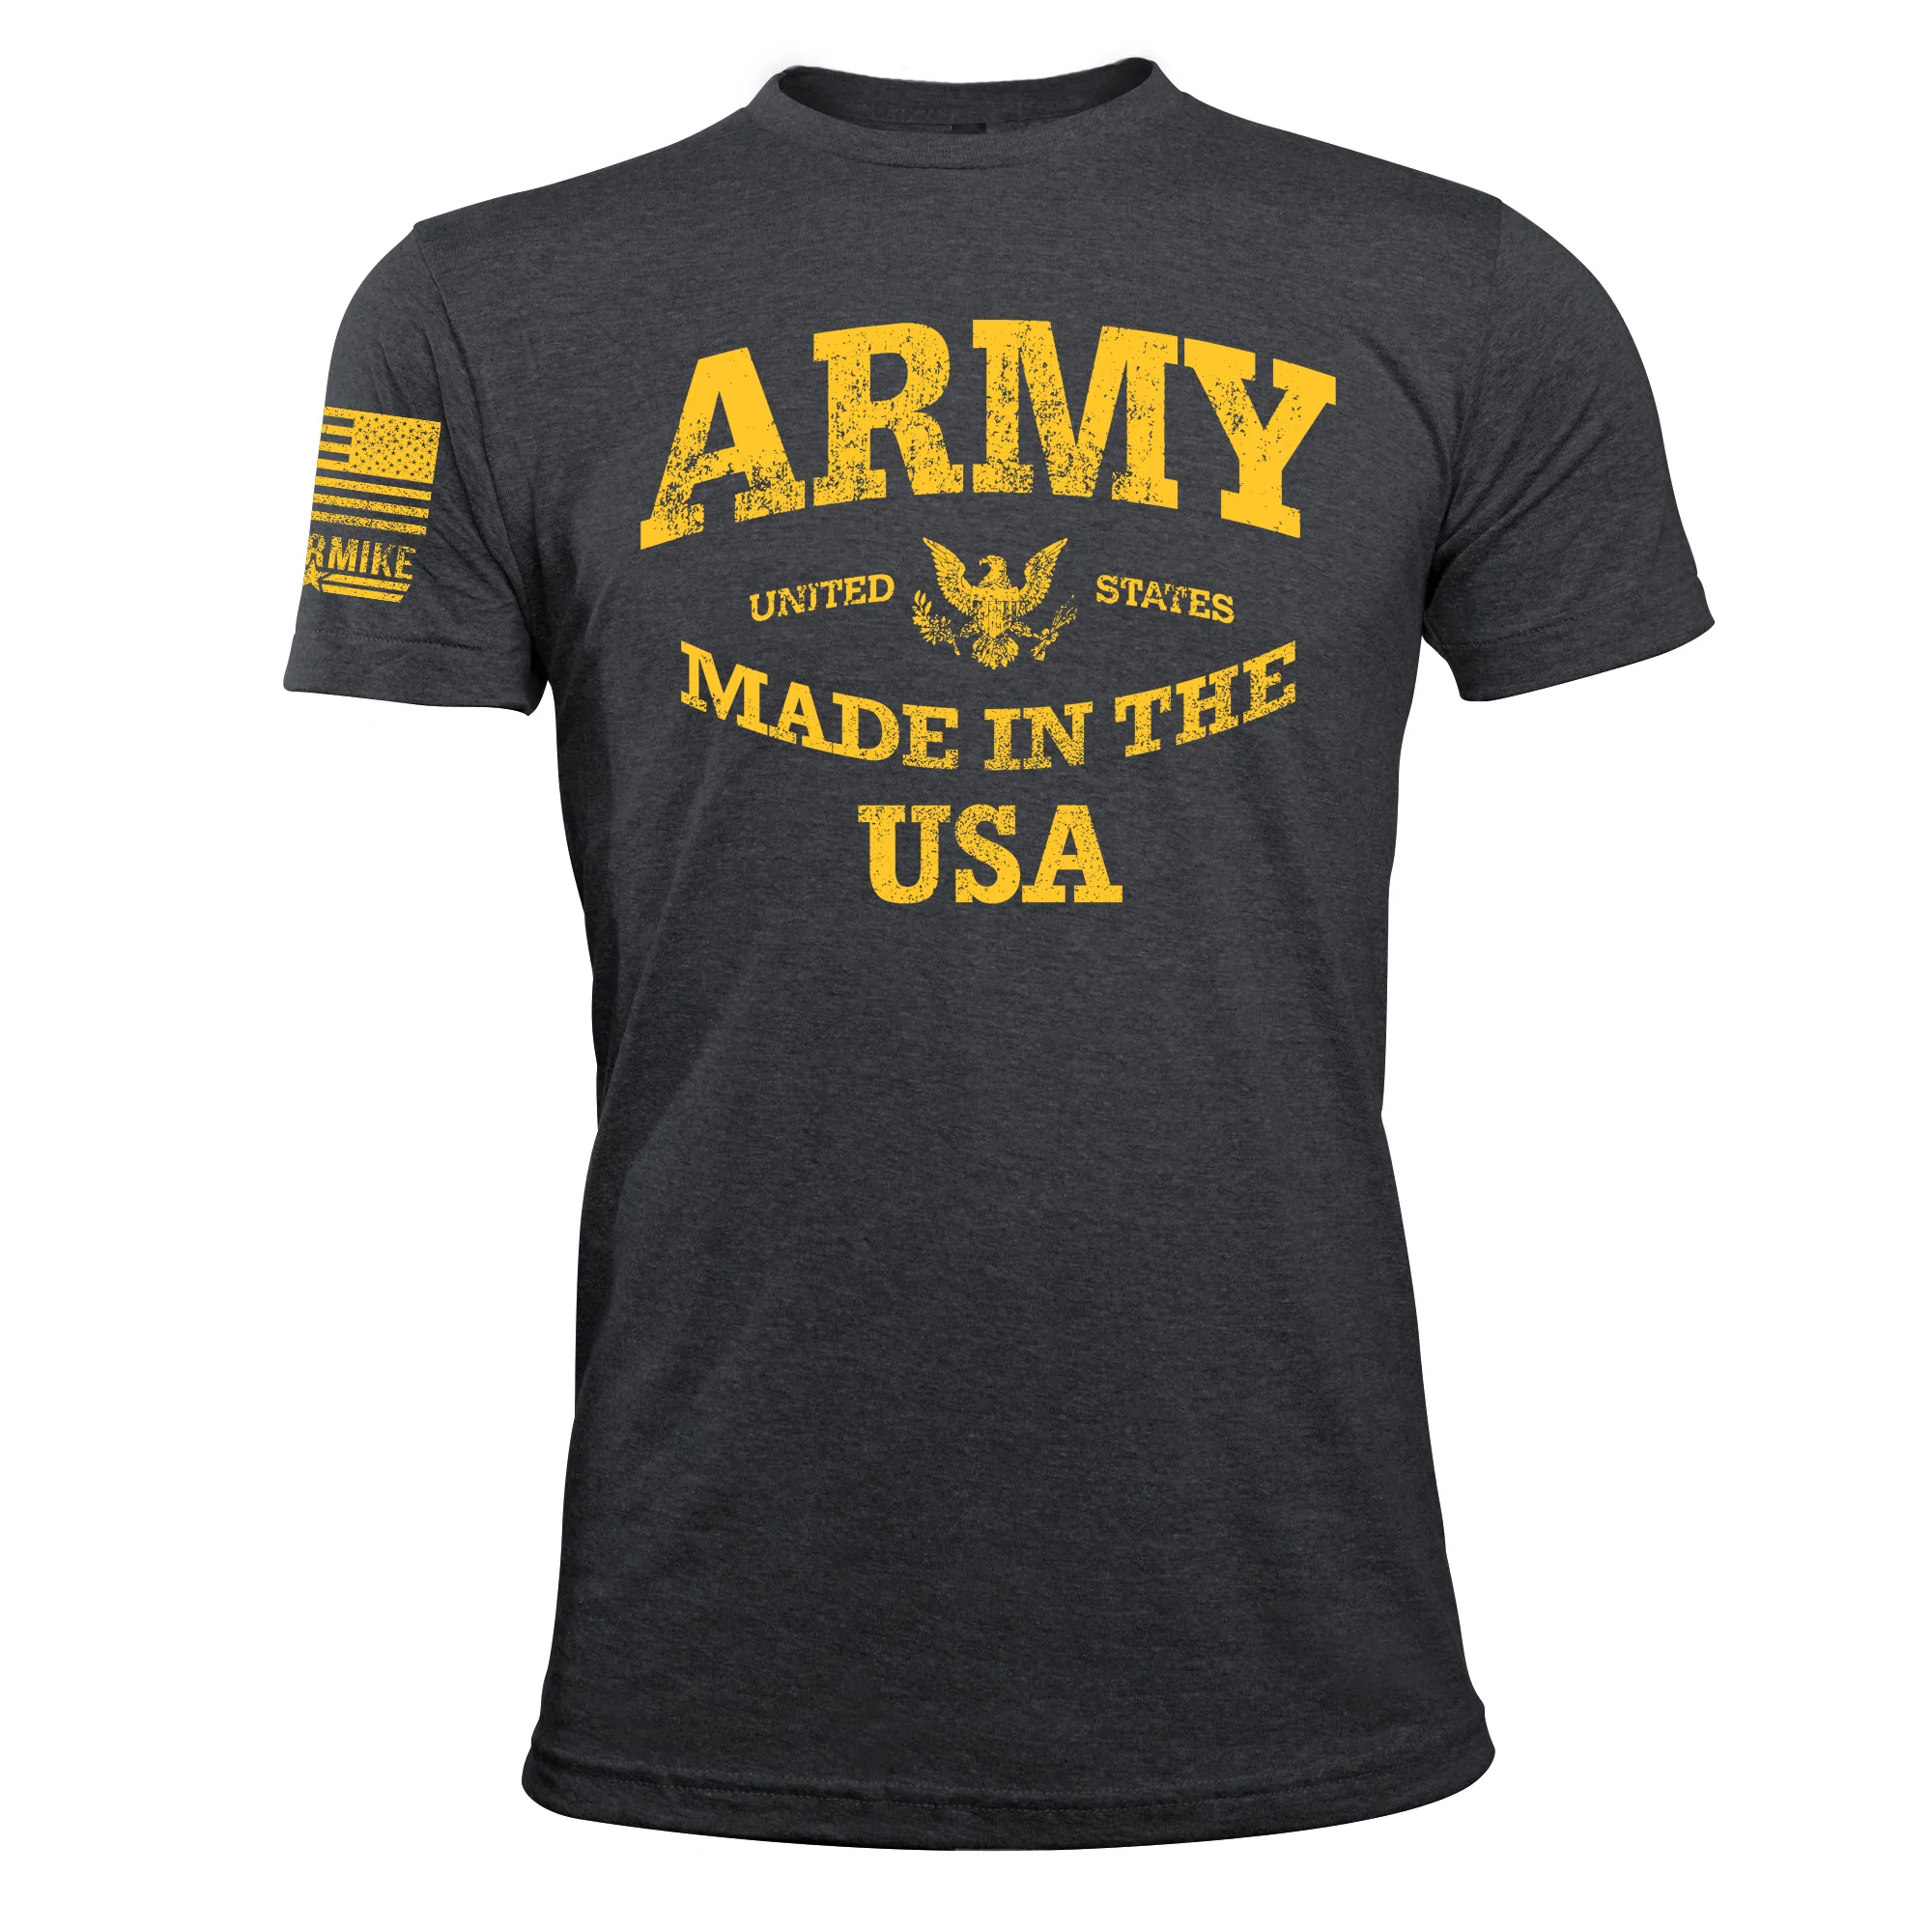 Oscar Mike Men's Army Made in the USA Tee